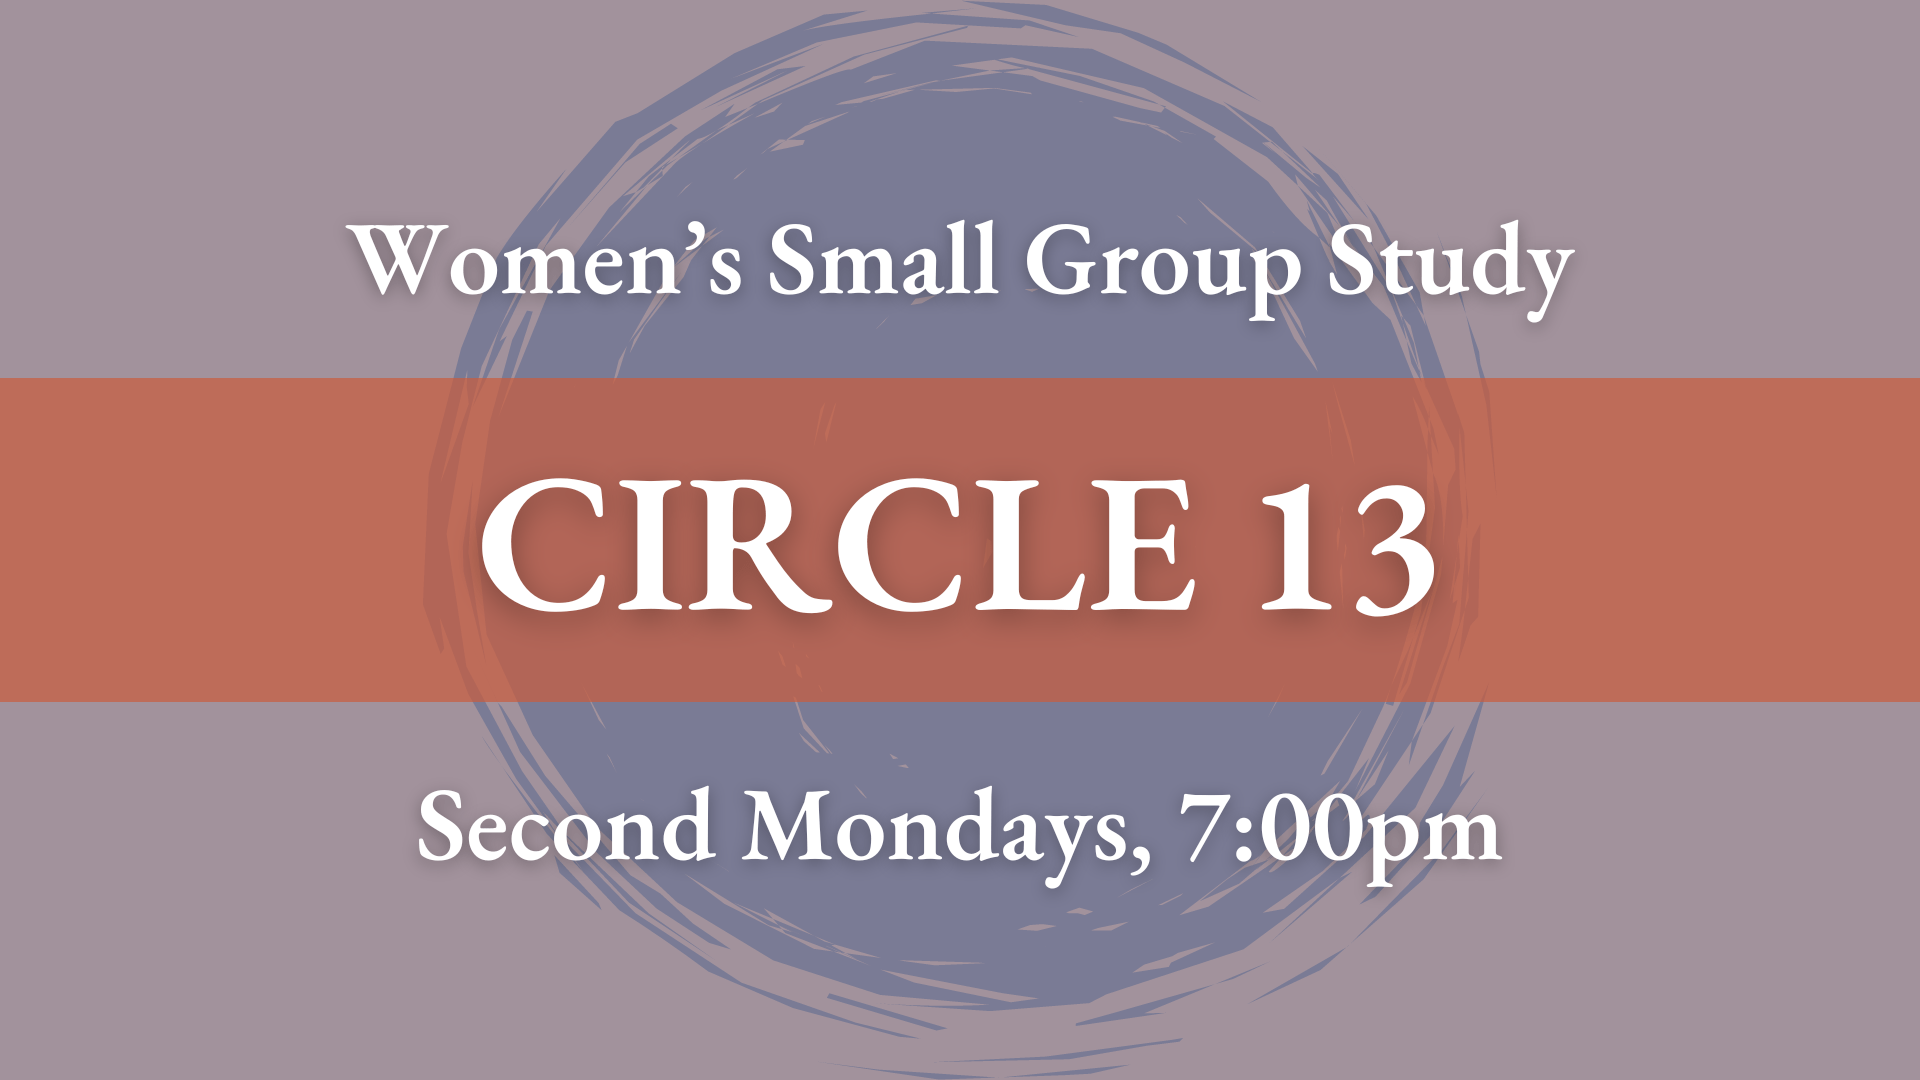 Graphic that reads: "Women's Small Group Study. CIRCLE 13. Second Mondays, 7:00pm."